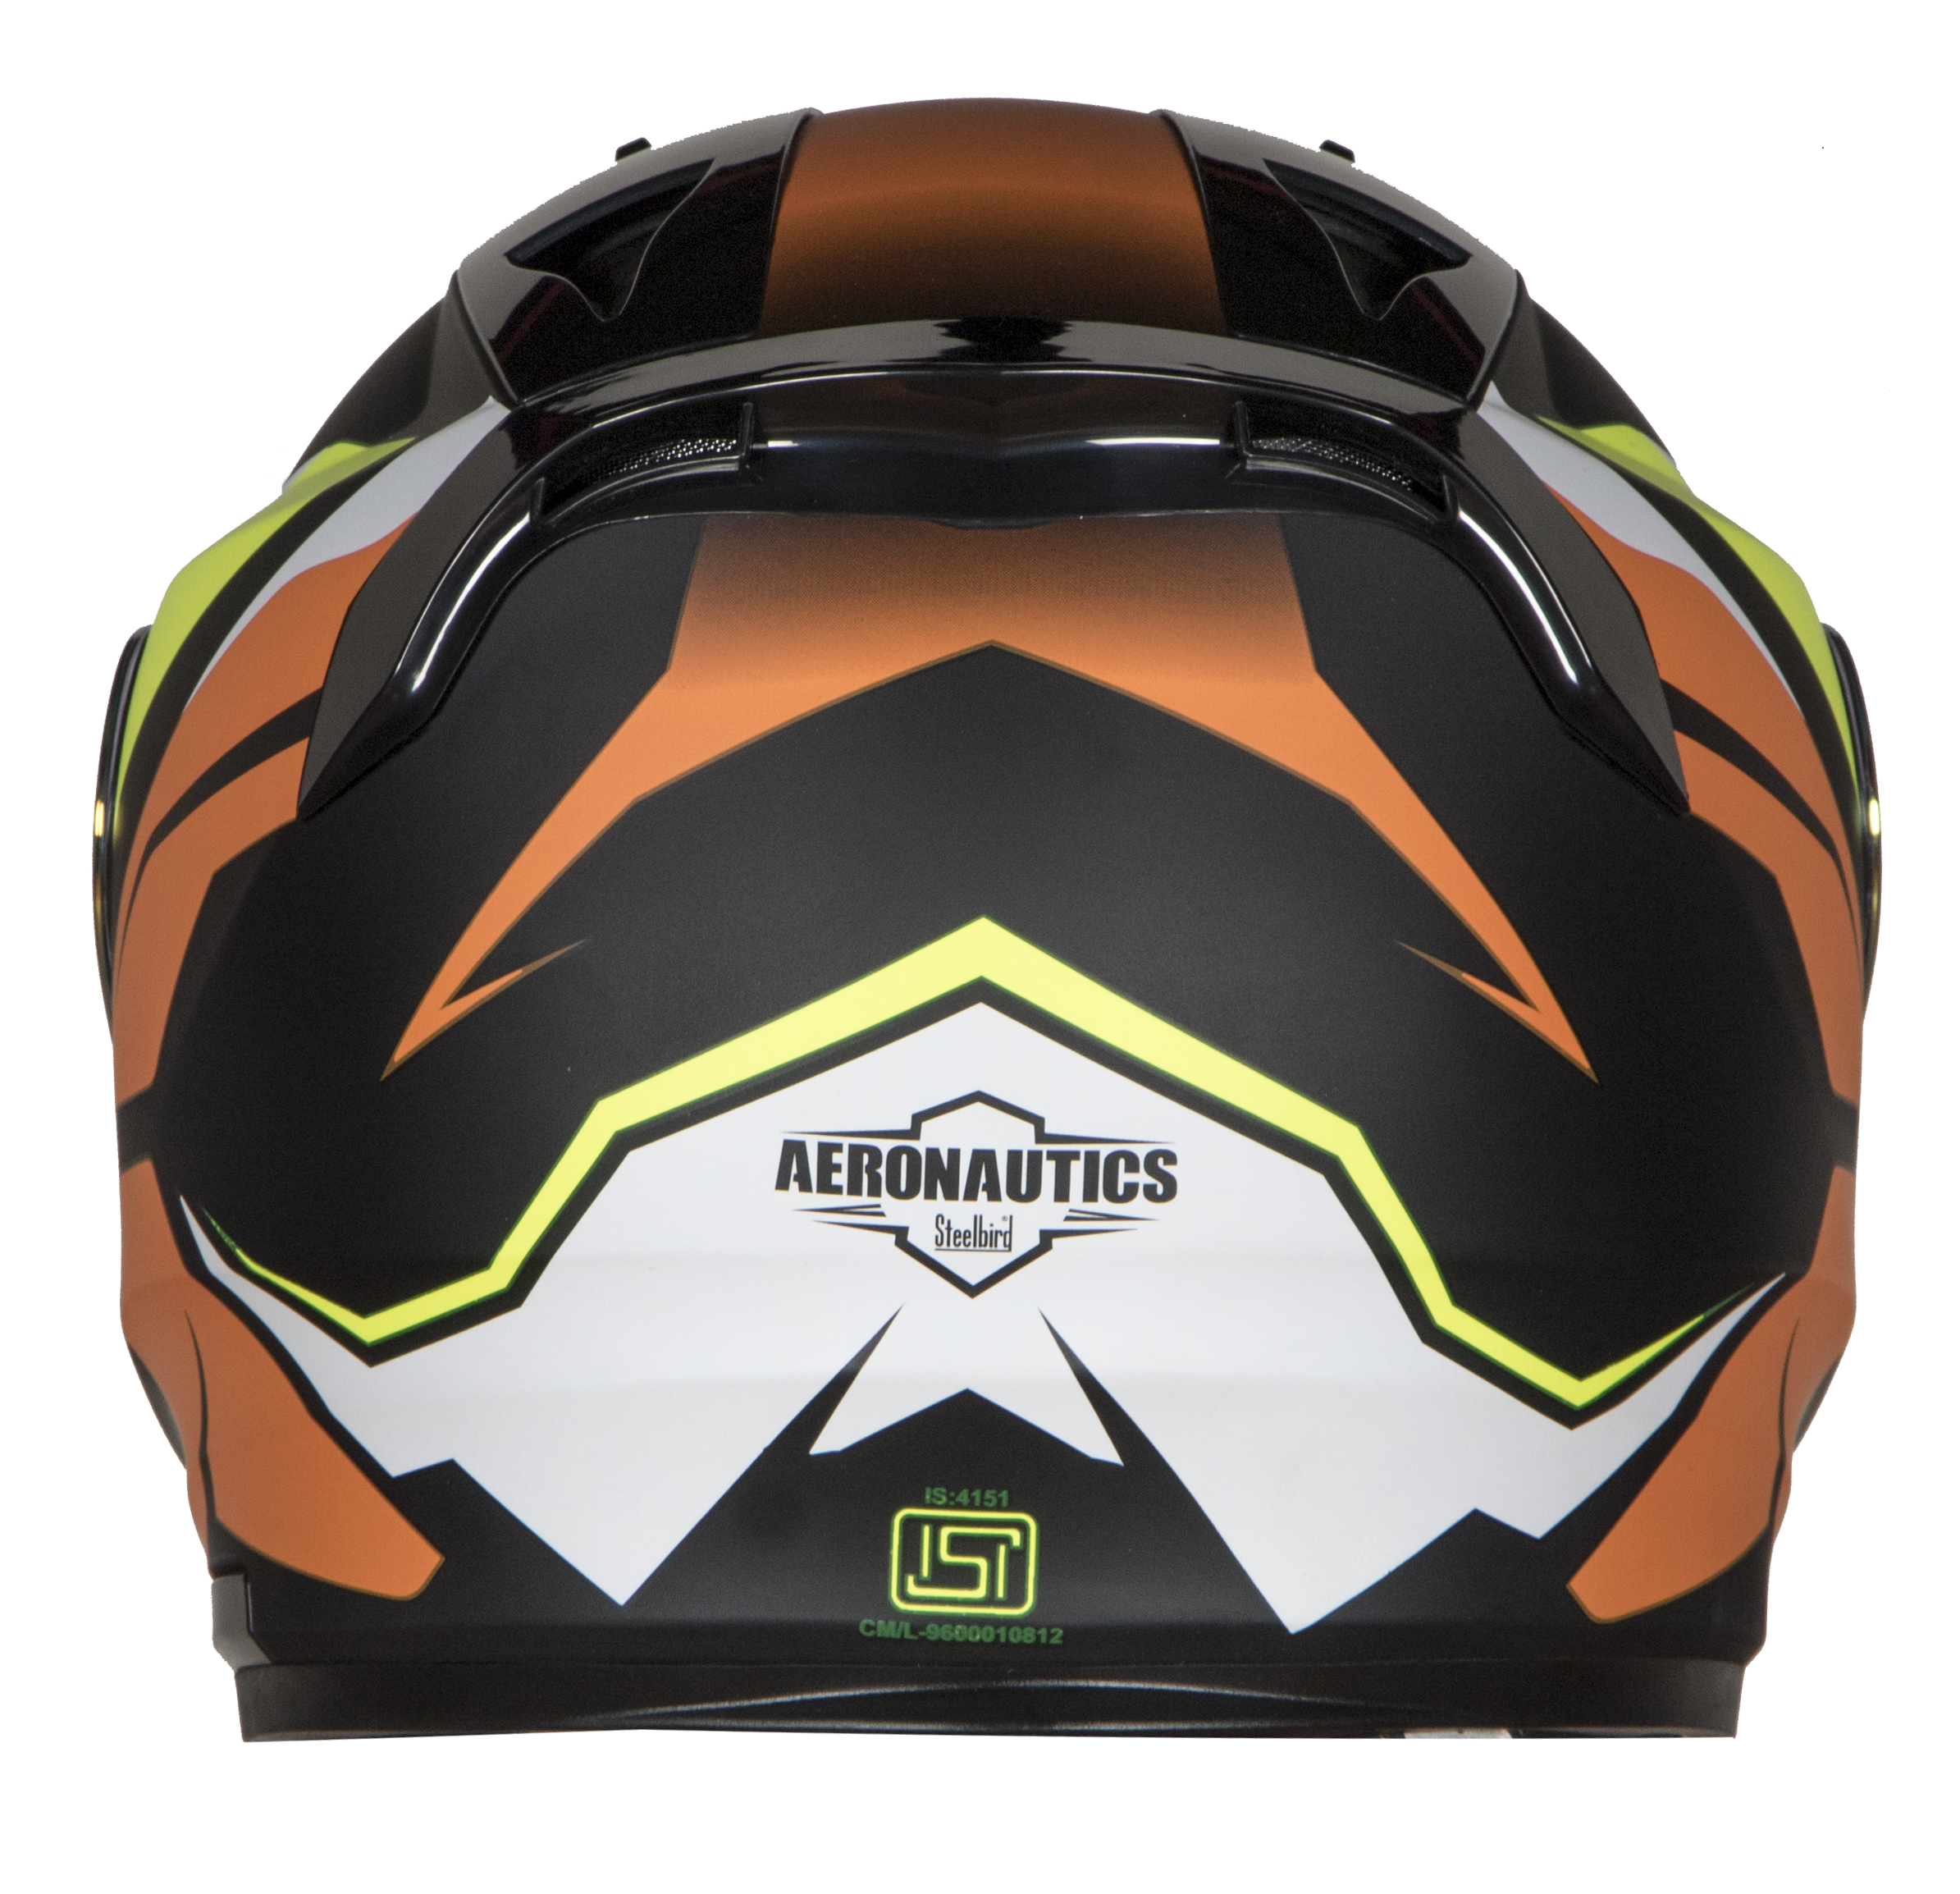 SA-1 Aviate Mat Black With Orange (Fitted With Clear Visor Extra Silver Chrome Visor Free)